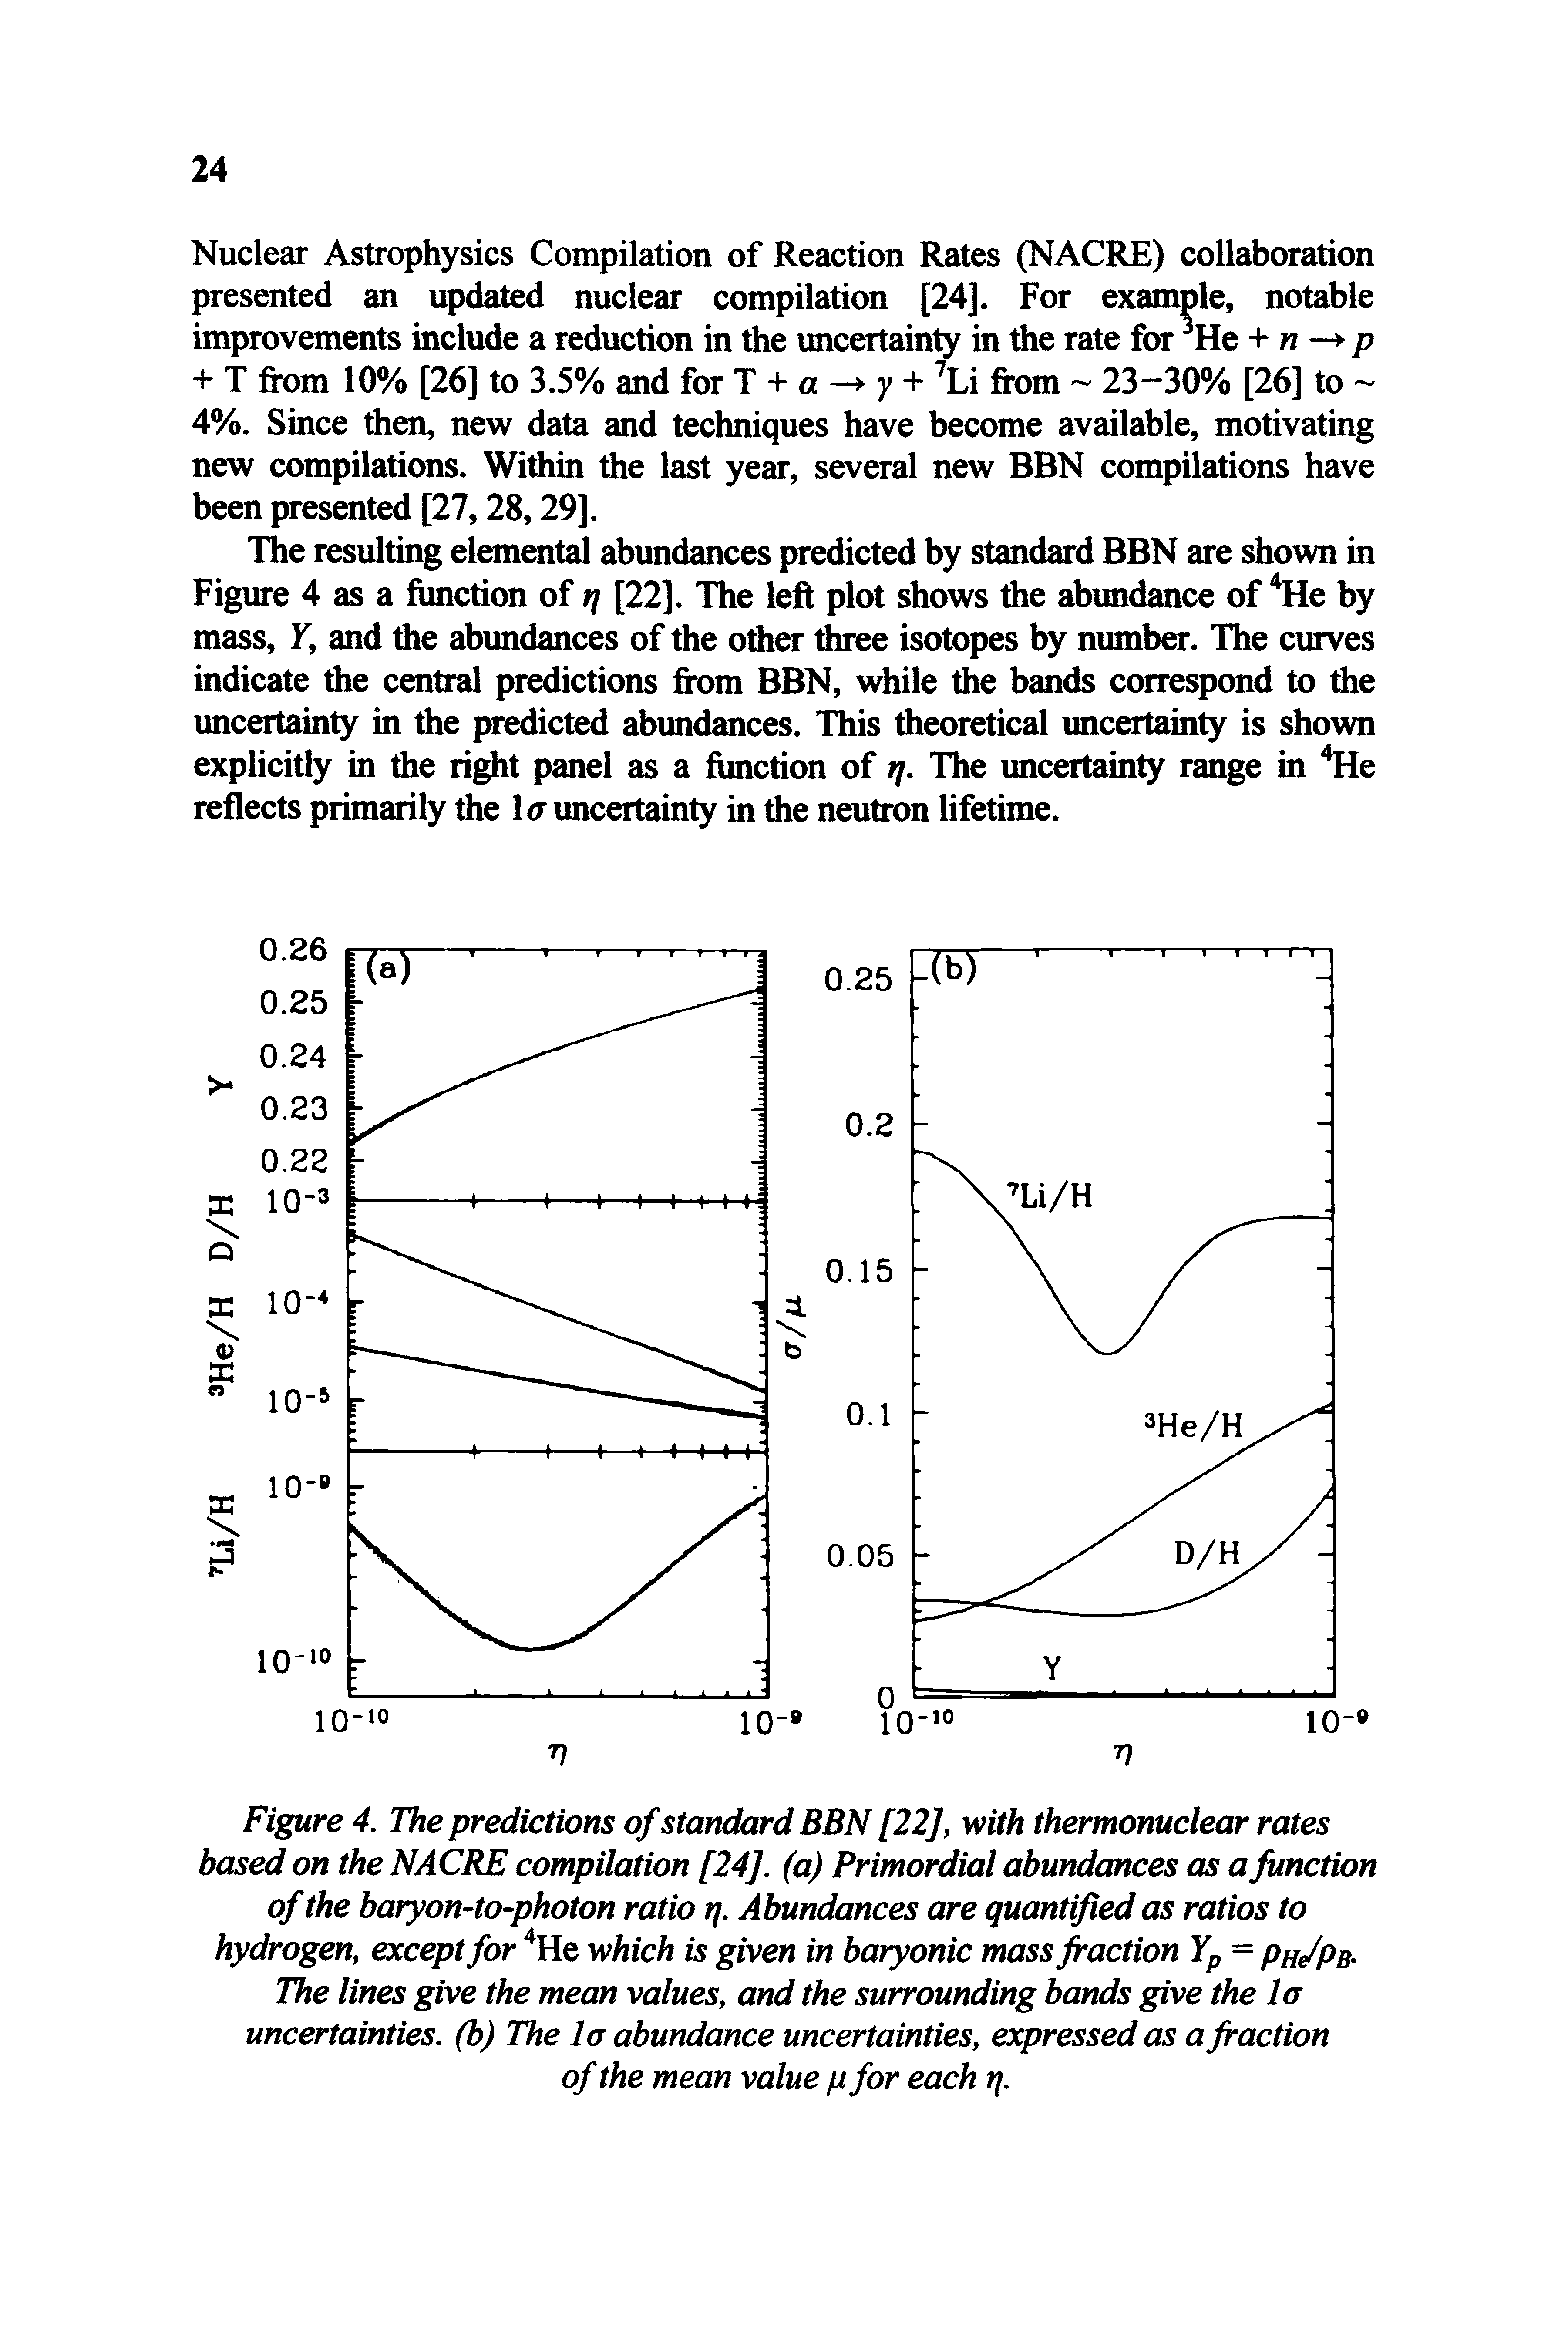 Figure 4. The predictions of standard BBN [22], with thermonuclear rates based on the NACRE compilation [24]. (a) Primordial abundances as a function of the baryon-to-photon ratio tj. Abundances are quantified as ratios to hydrogen, except for He which is given in baryonic mass fraction Yp = Ph/Pb-The lines give the mean values, and the surrounding bands give the la uncertainties, (b) The la abundance uncertainties, expressed as a fraction of the mean value p for each q.